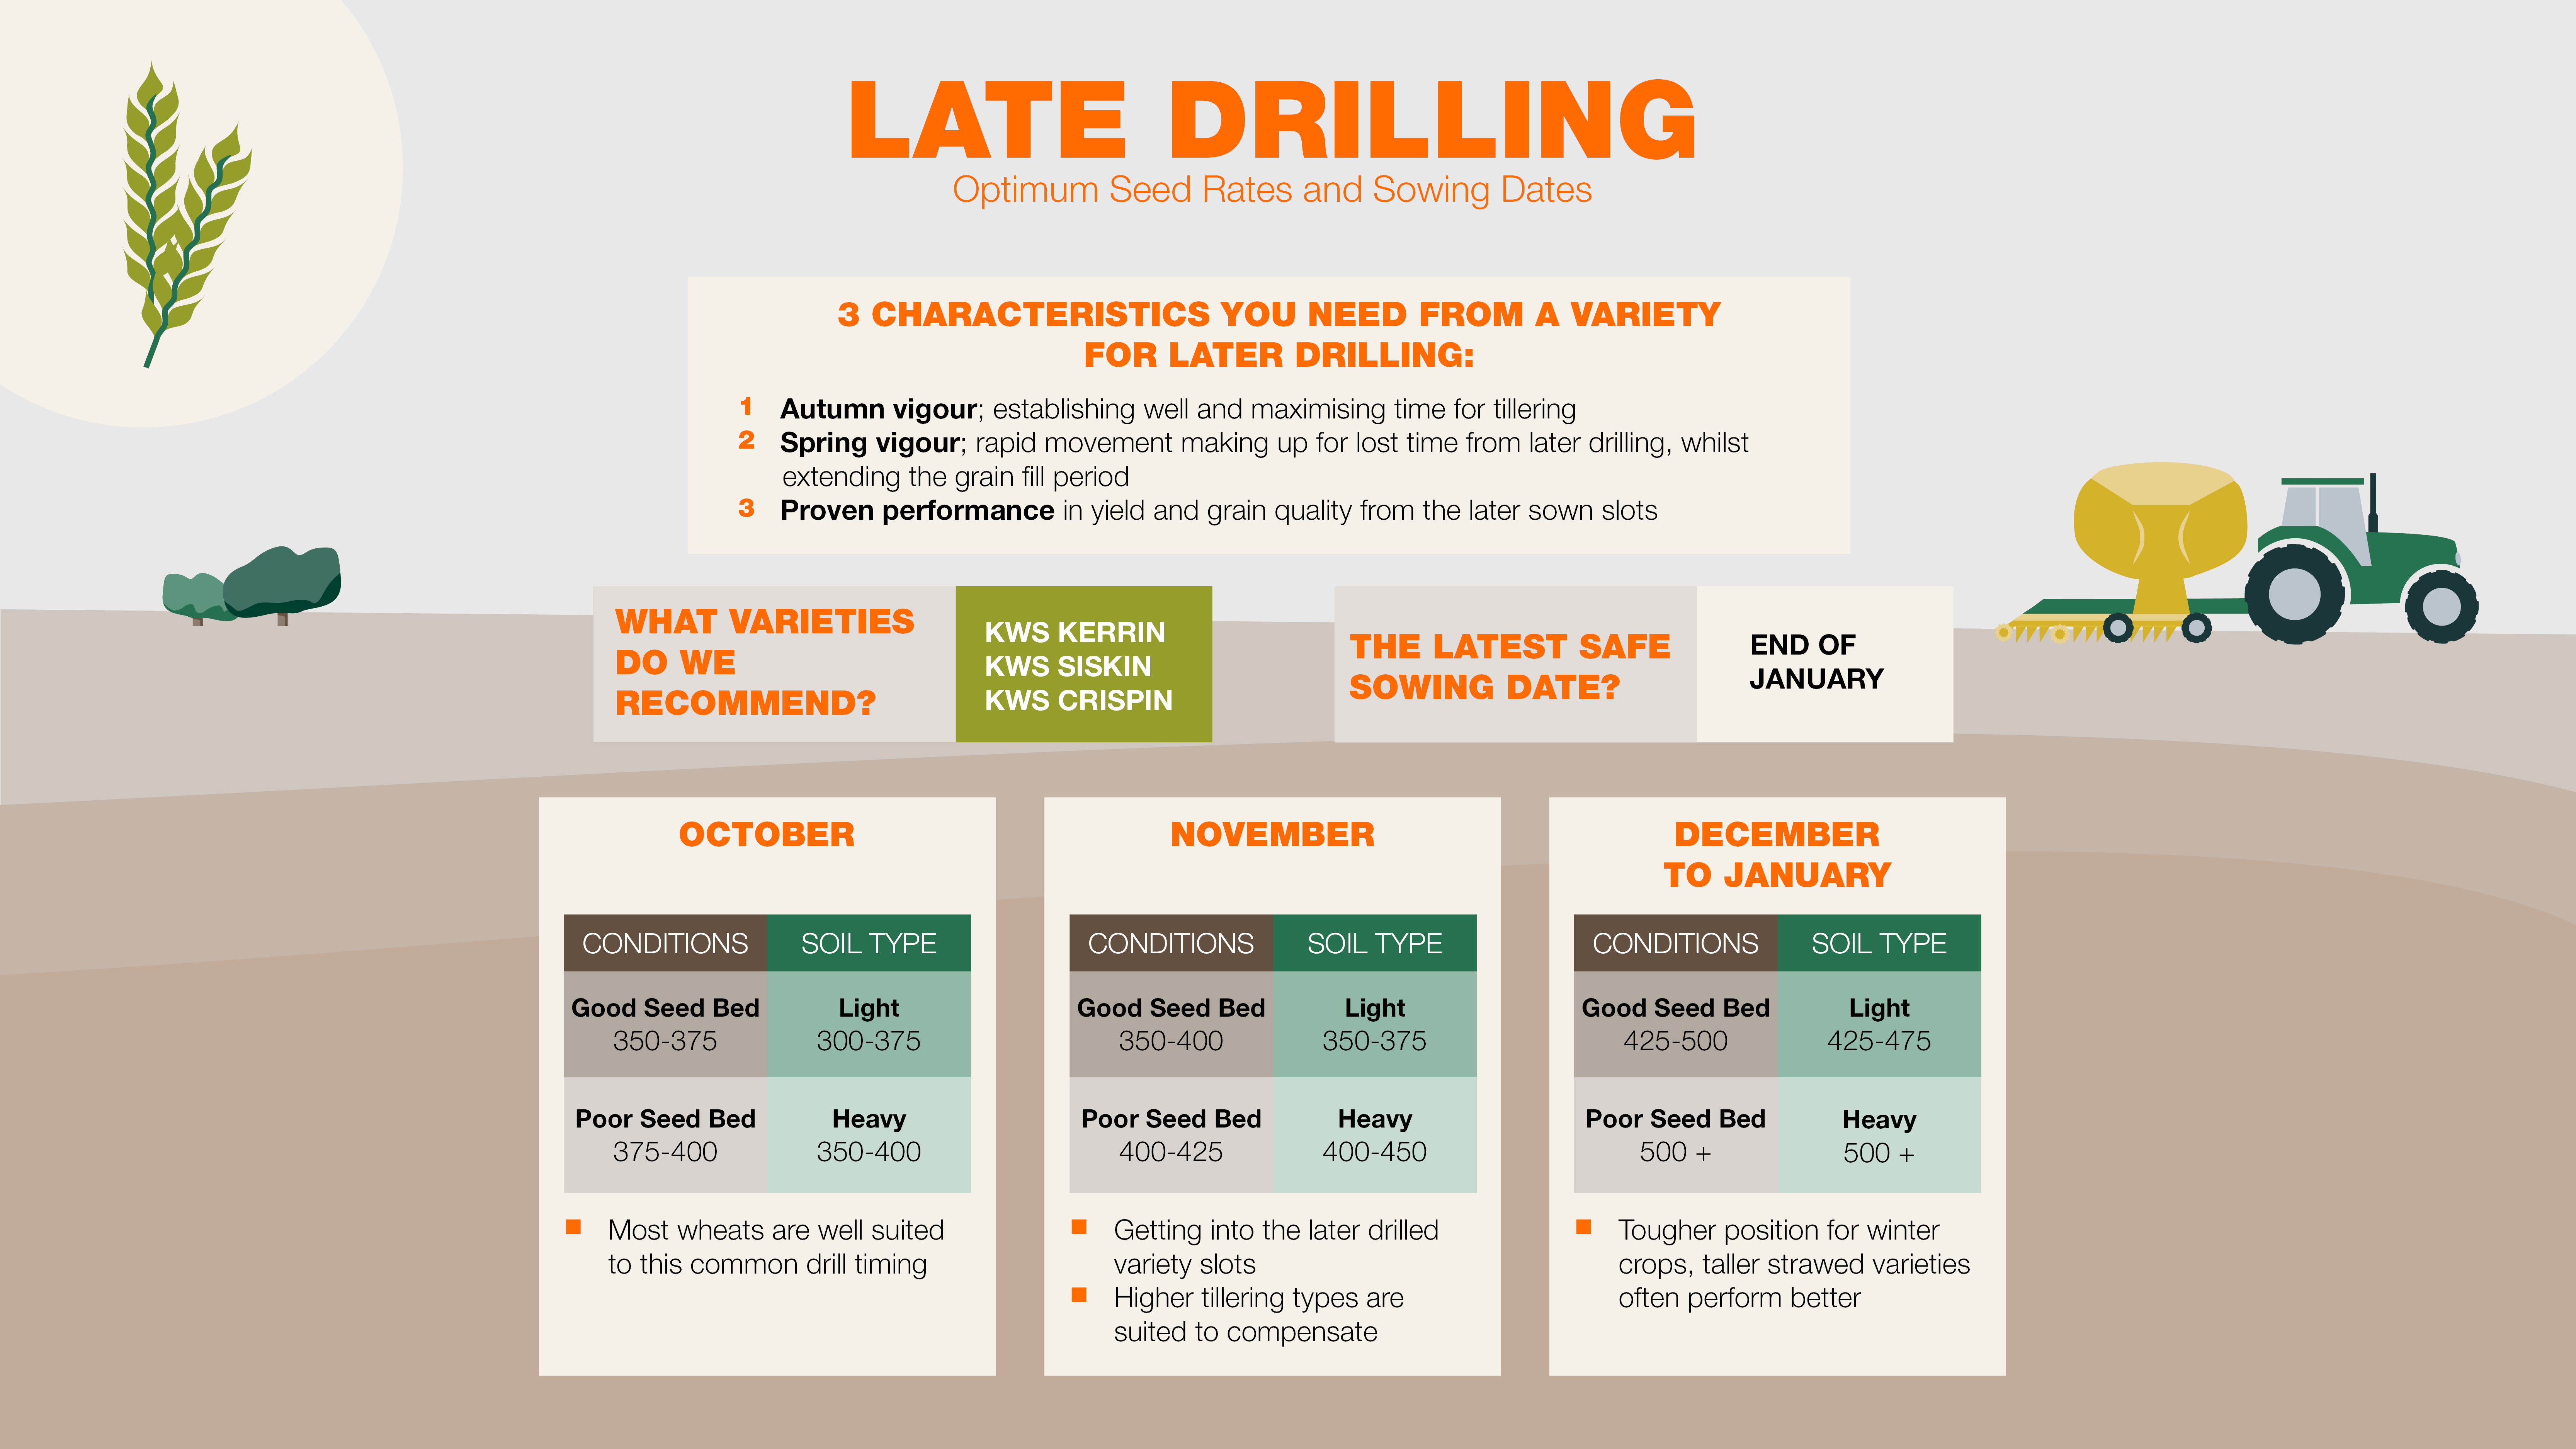 Late-wheat-Drilling-Seed-Rate-Infographic.jpg